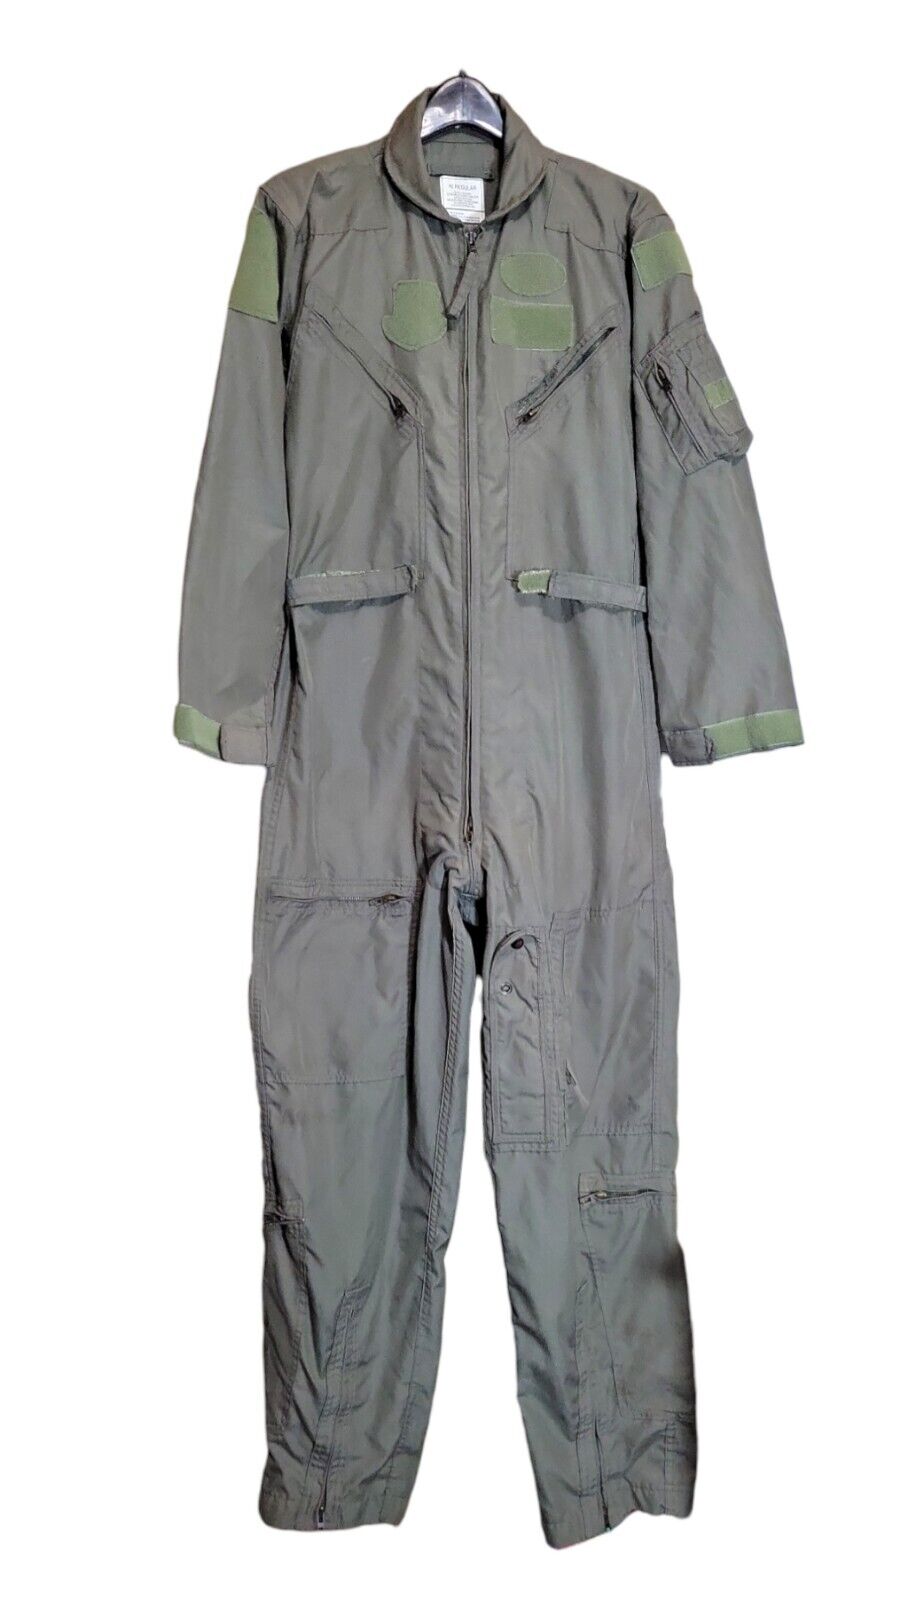 Military Flyers Mens 40R Coveralls CWU-27P Flight Suit Sage Green Air Force Army